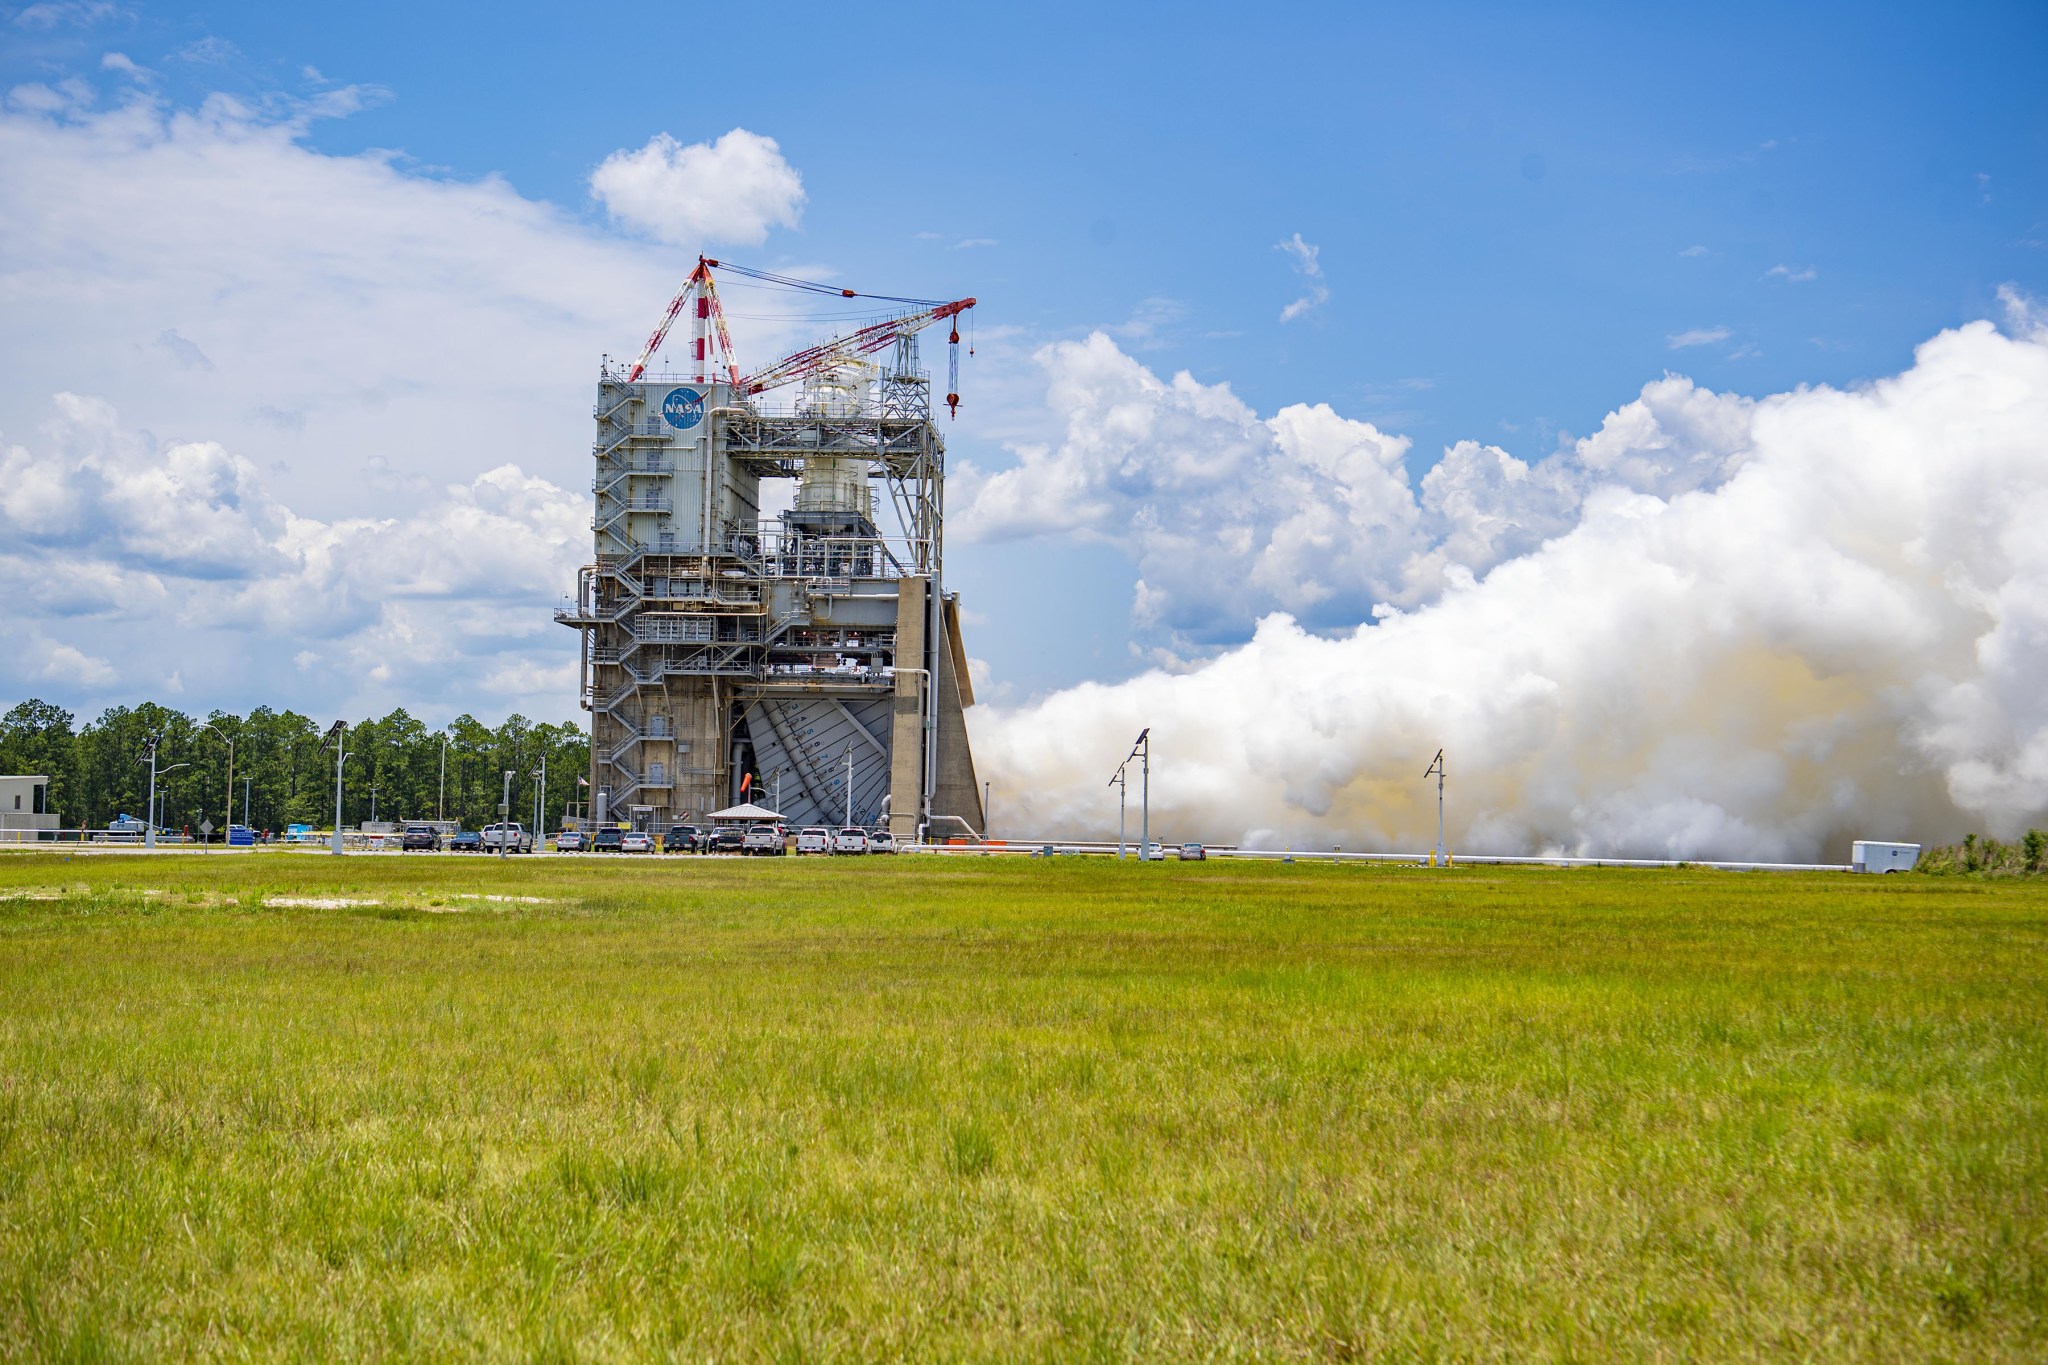 NASA conducts an RS-25 hot fire test on the Fred Haise Test Stand at NASA’s Stennis Space Center in south Mississippi on June 22, 2023.